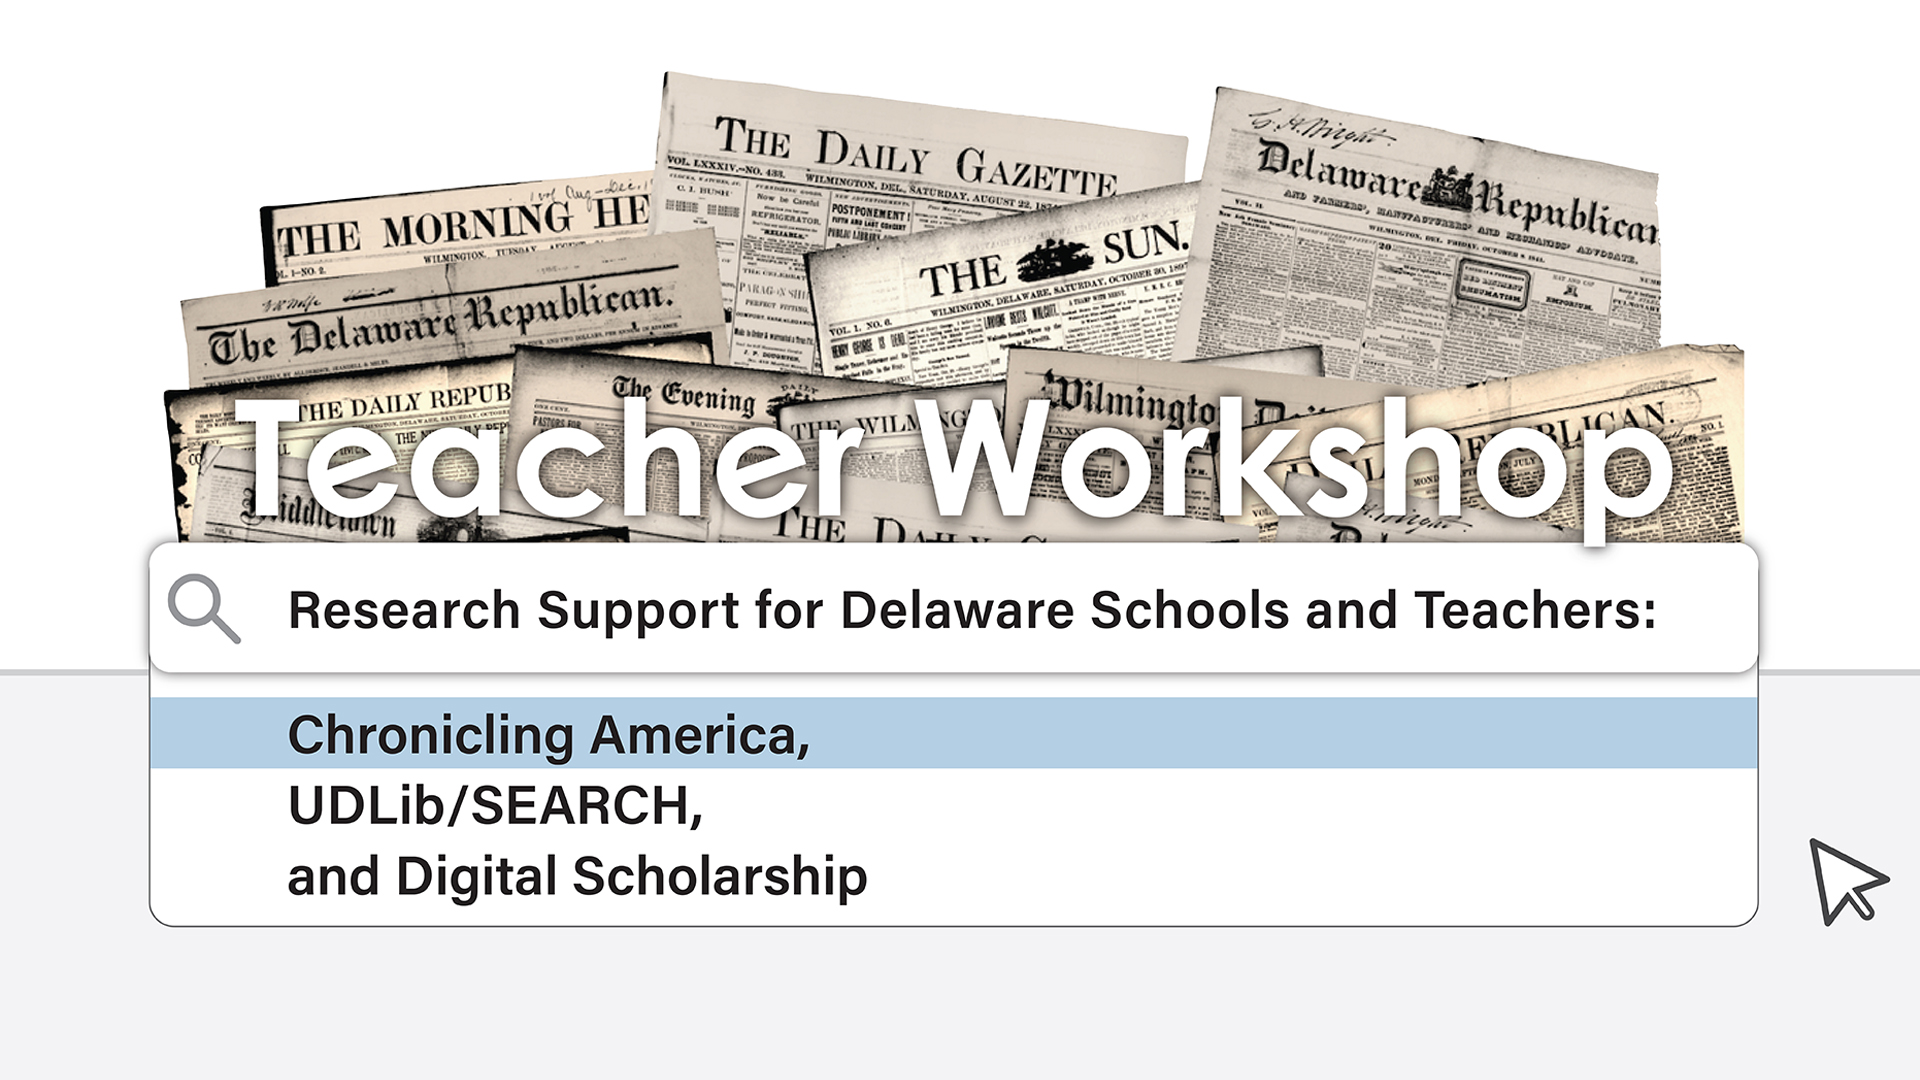 Research Support for Delaware Schools and Teachers: Chronicling America, UDLib/SEARCH and Digital Scholarship